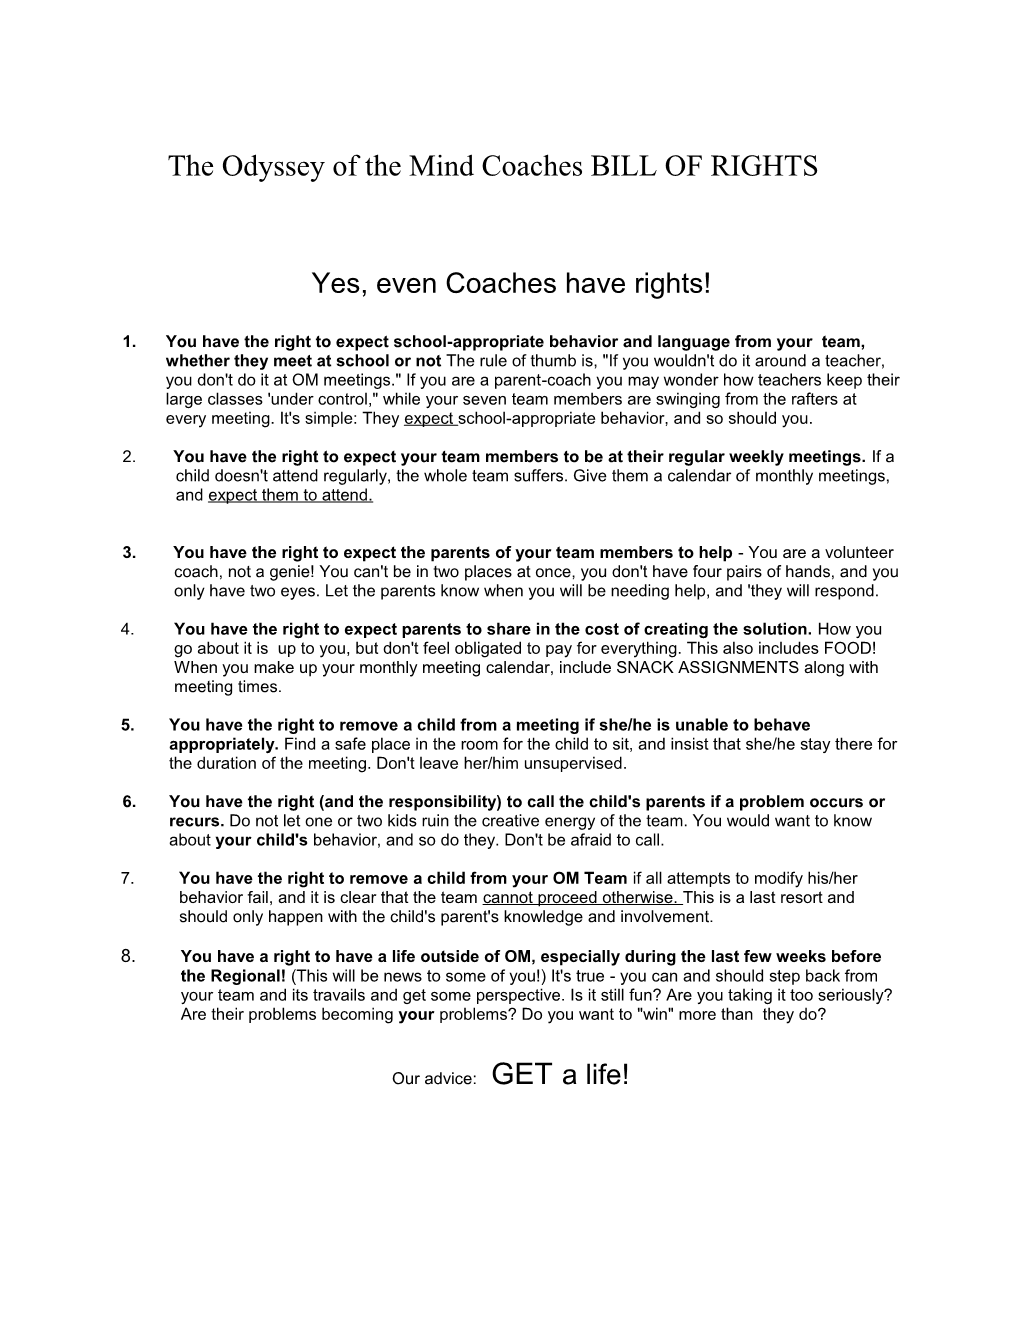 The Odyssey of the Mind Coaches BILL of RIGHTS